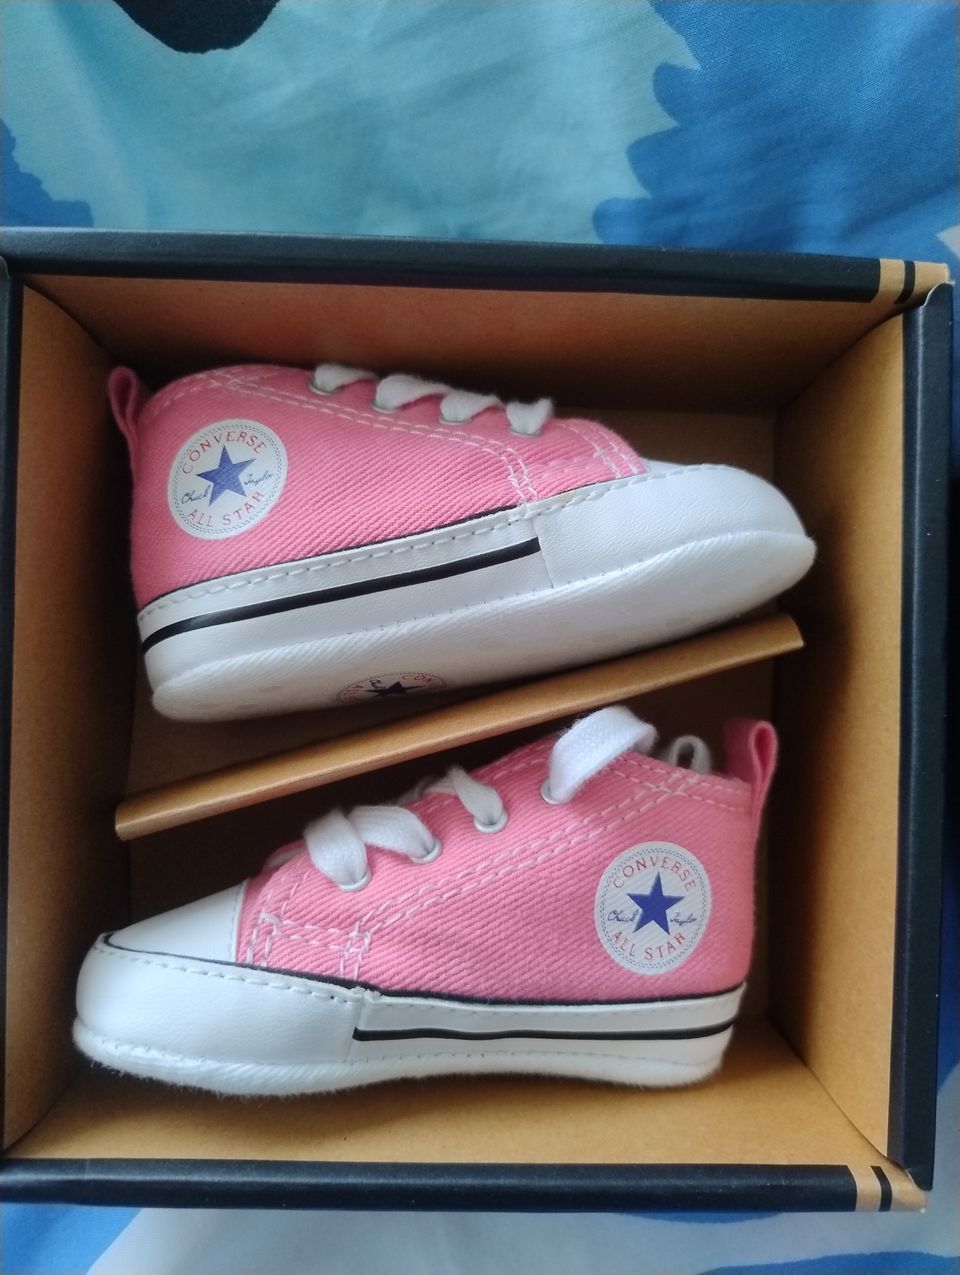 Koko 2 / Converse kengät vauvalle / taaperolle / Baby shoes / toddler